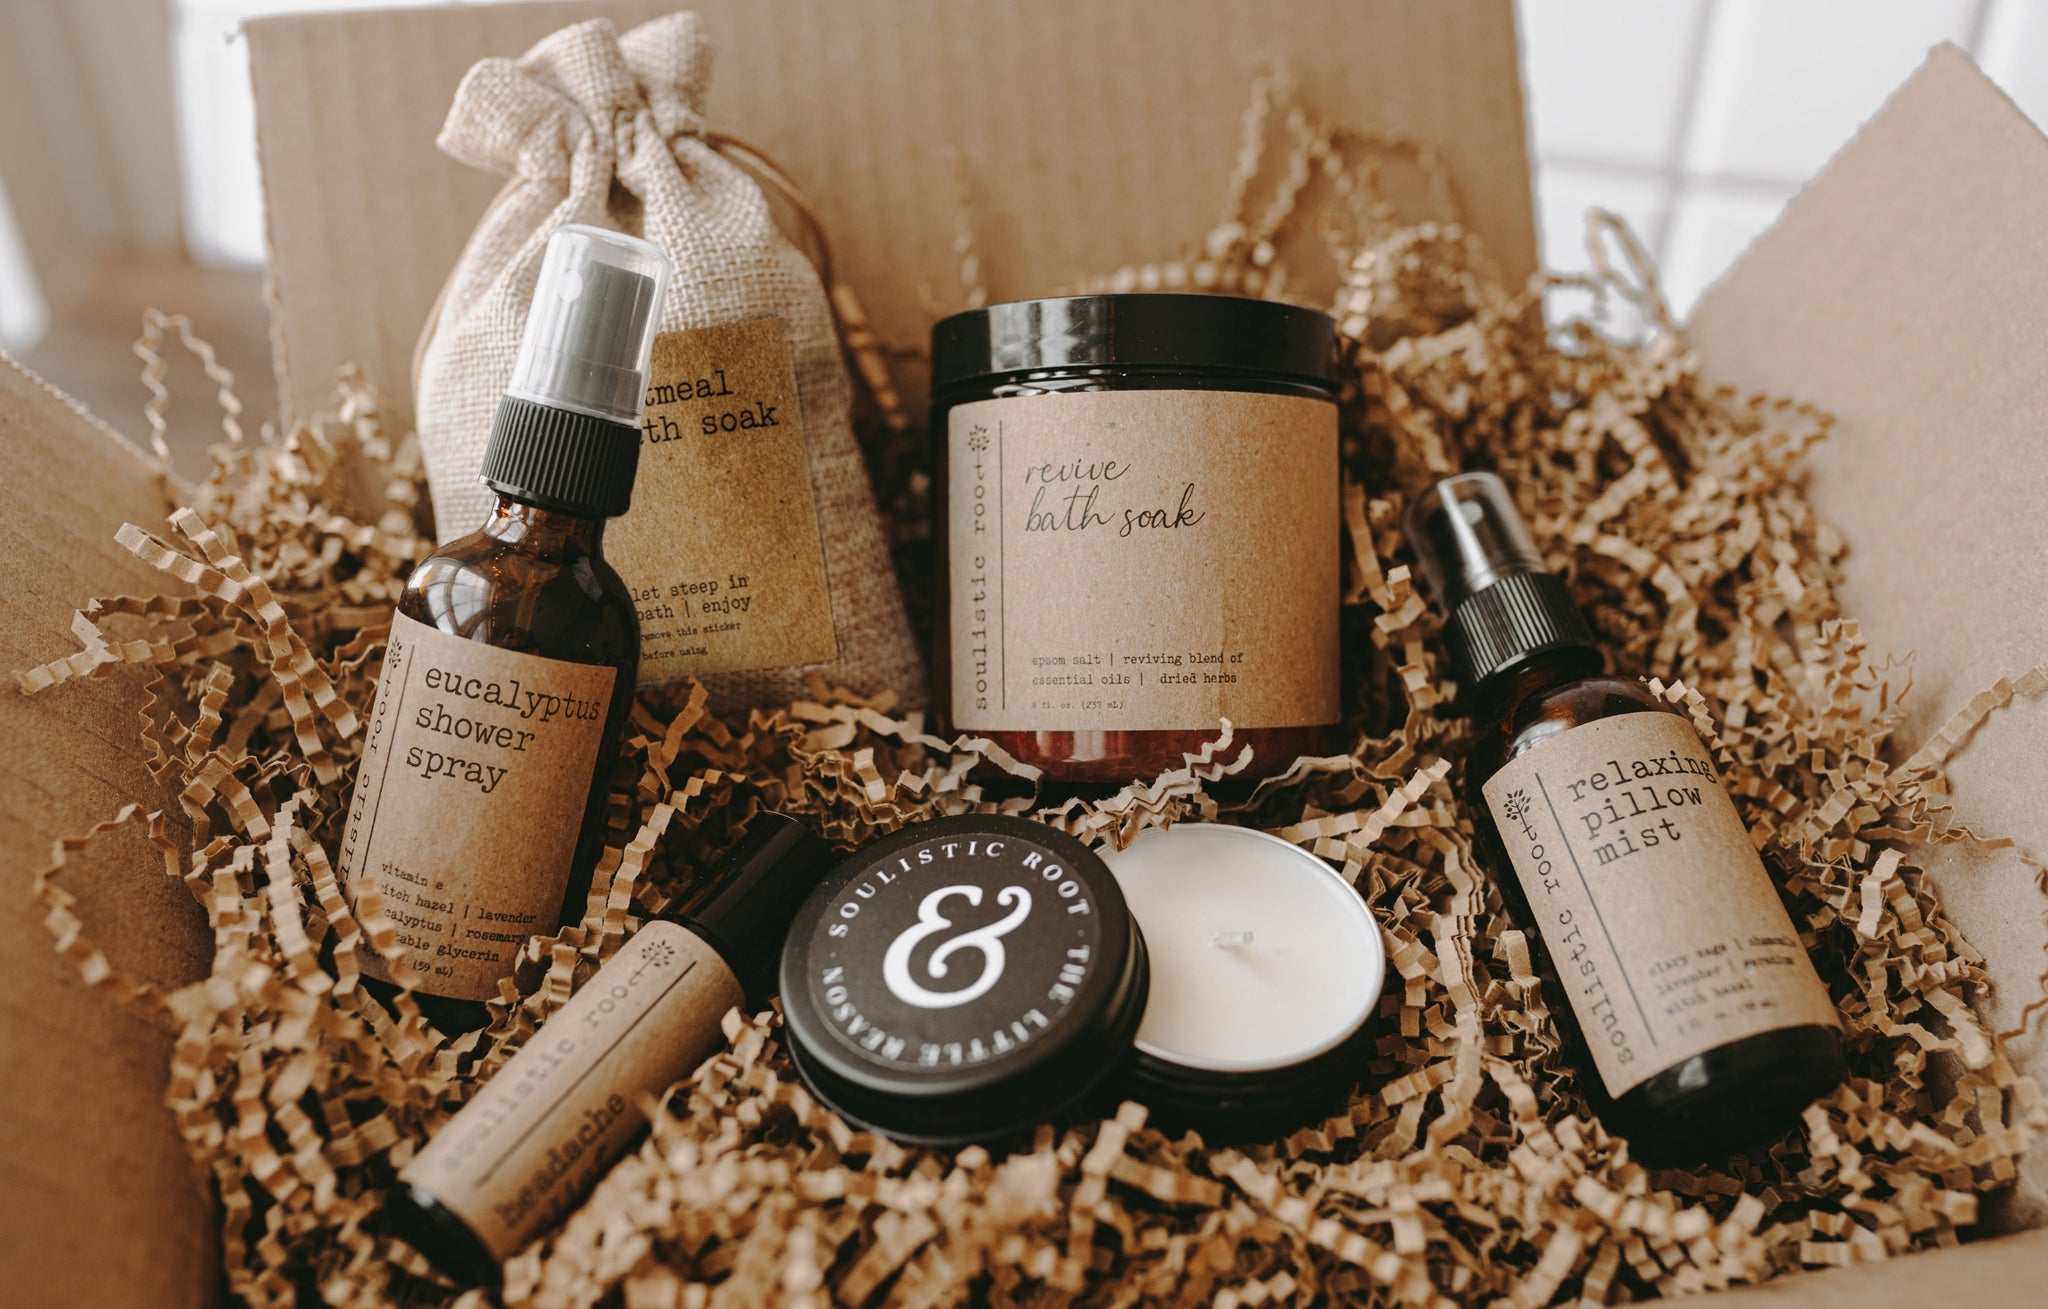 The spa gift set which includes a eucalyptus shower spray, organic lavender oatmeal bath soak, headache relief roller, essential oil & herb revive bath soak and a relaxing pillow mist. The set is in a shipping box with kraft paper and a 1 oz candle that is in a black tin.